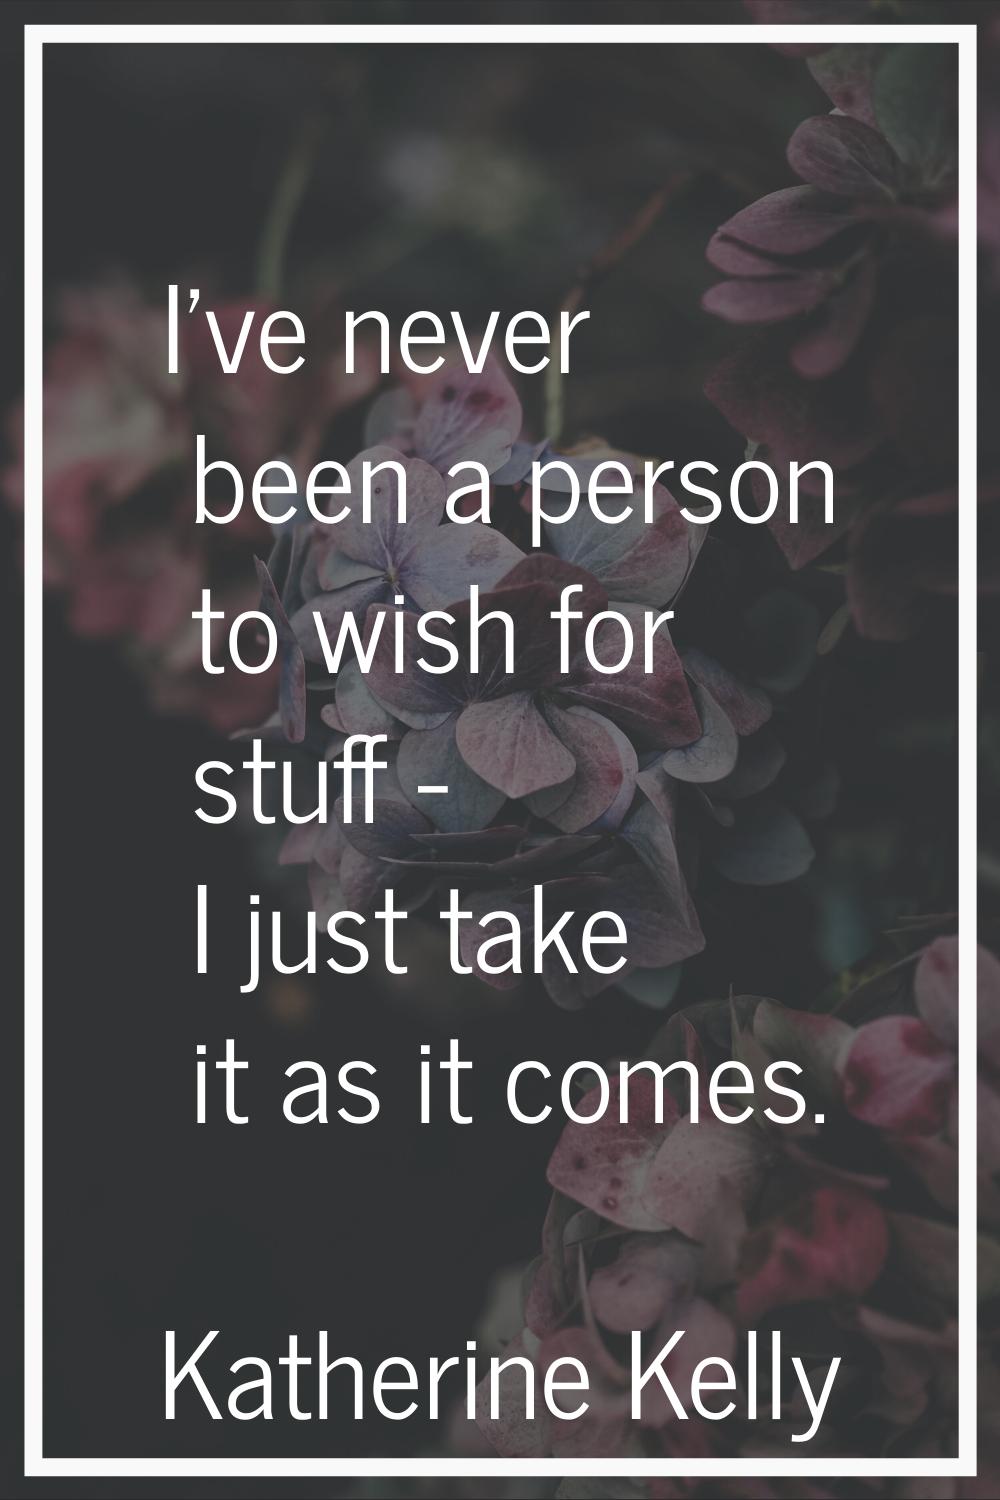 I've never been a person to wish for stuff - I just take it as it comes.